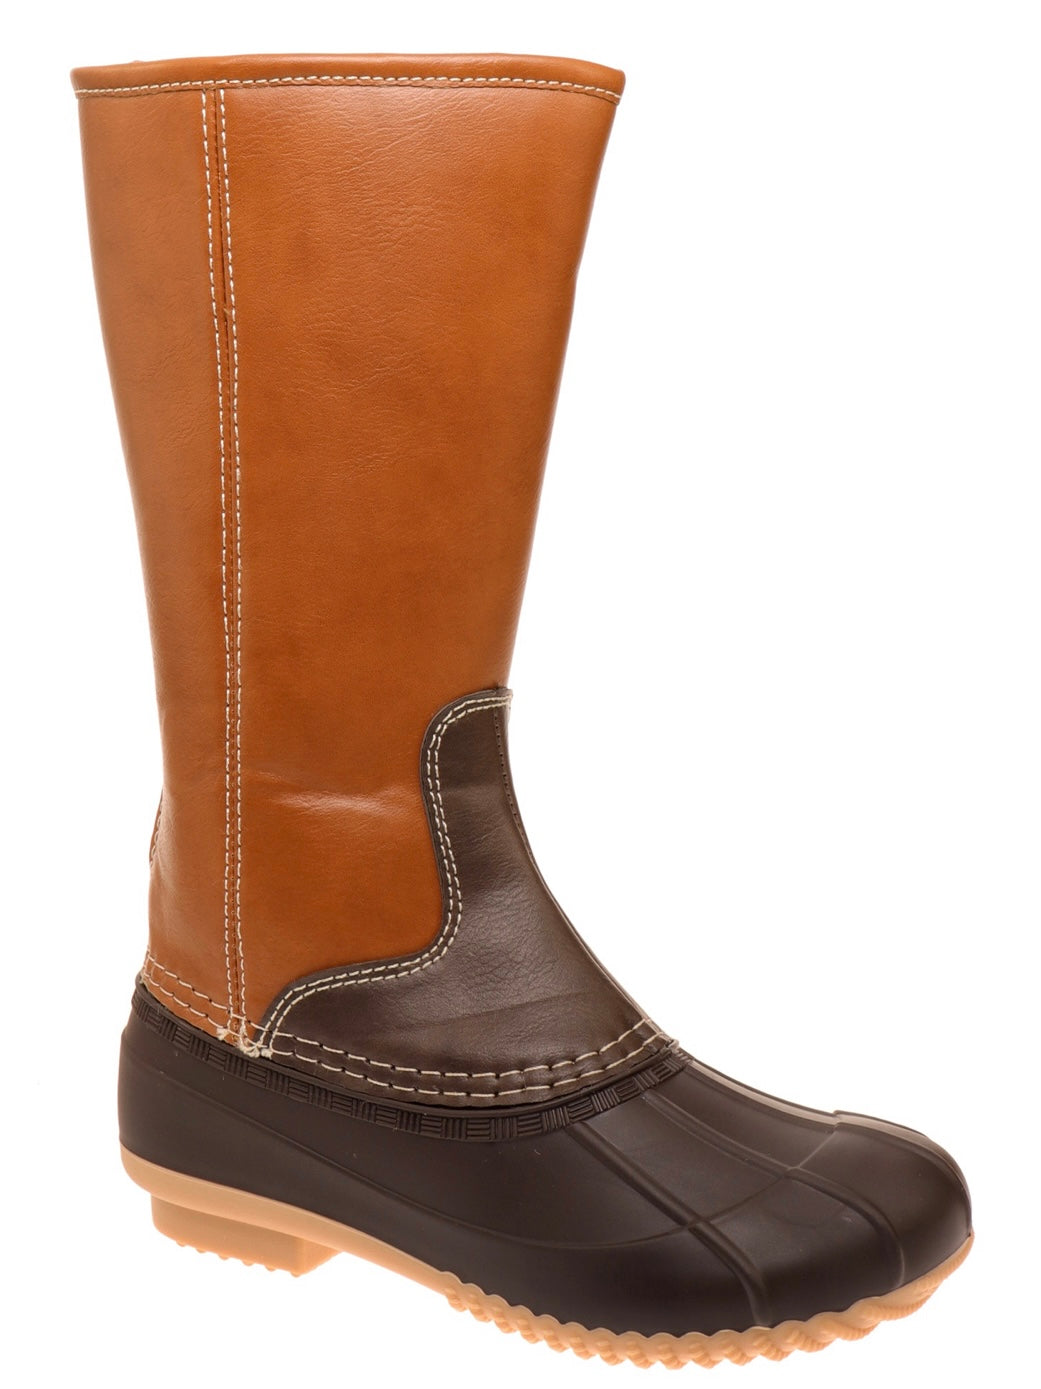 Outwoods Kids Fall-22 in Brown Combo Tall Zip Up Duck Boots